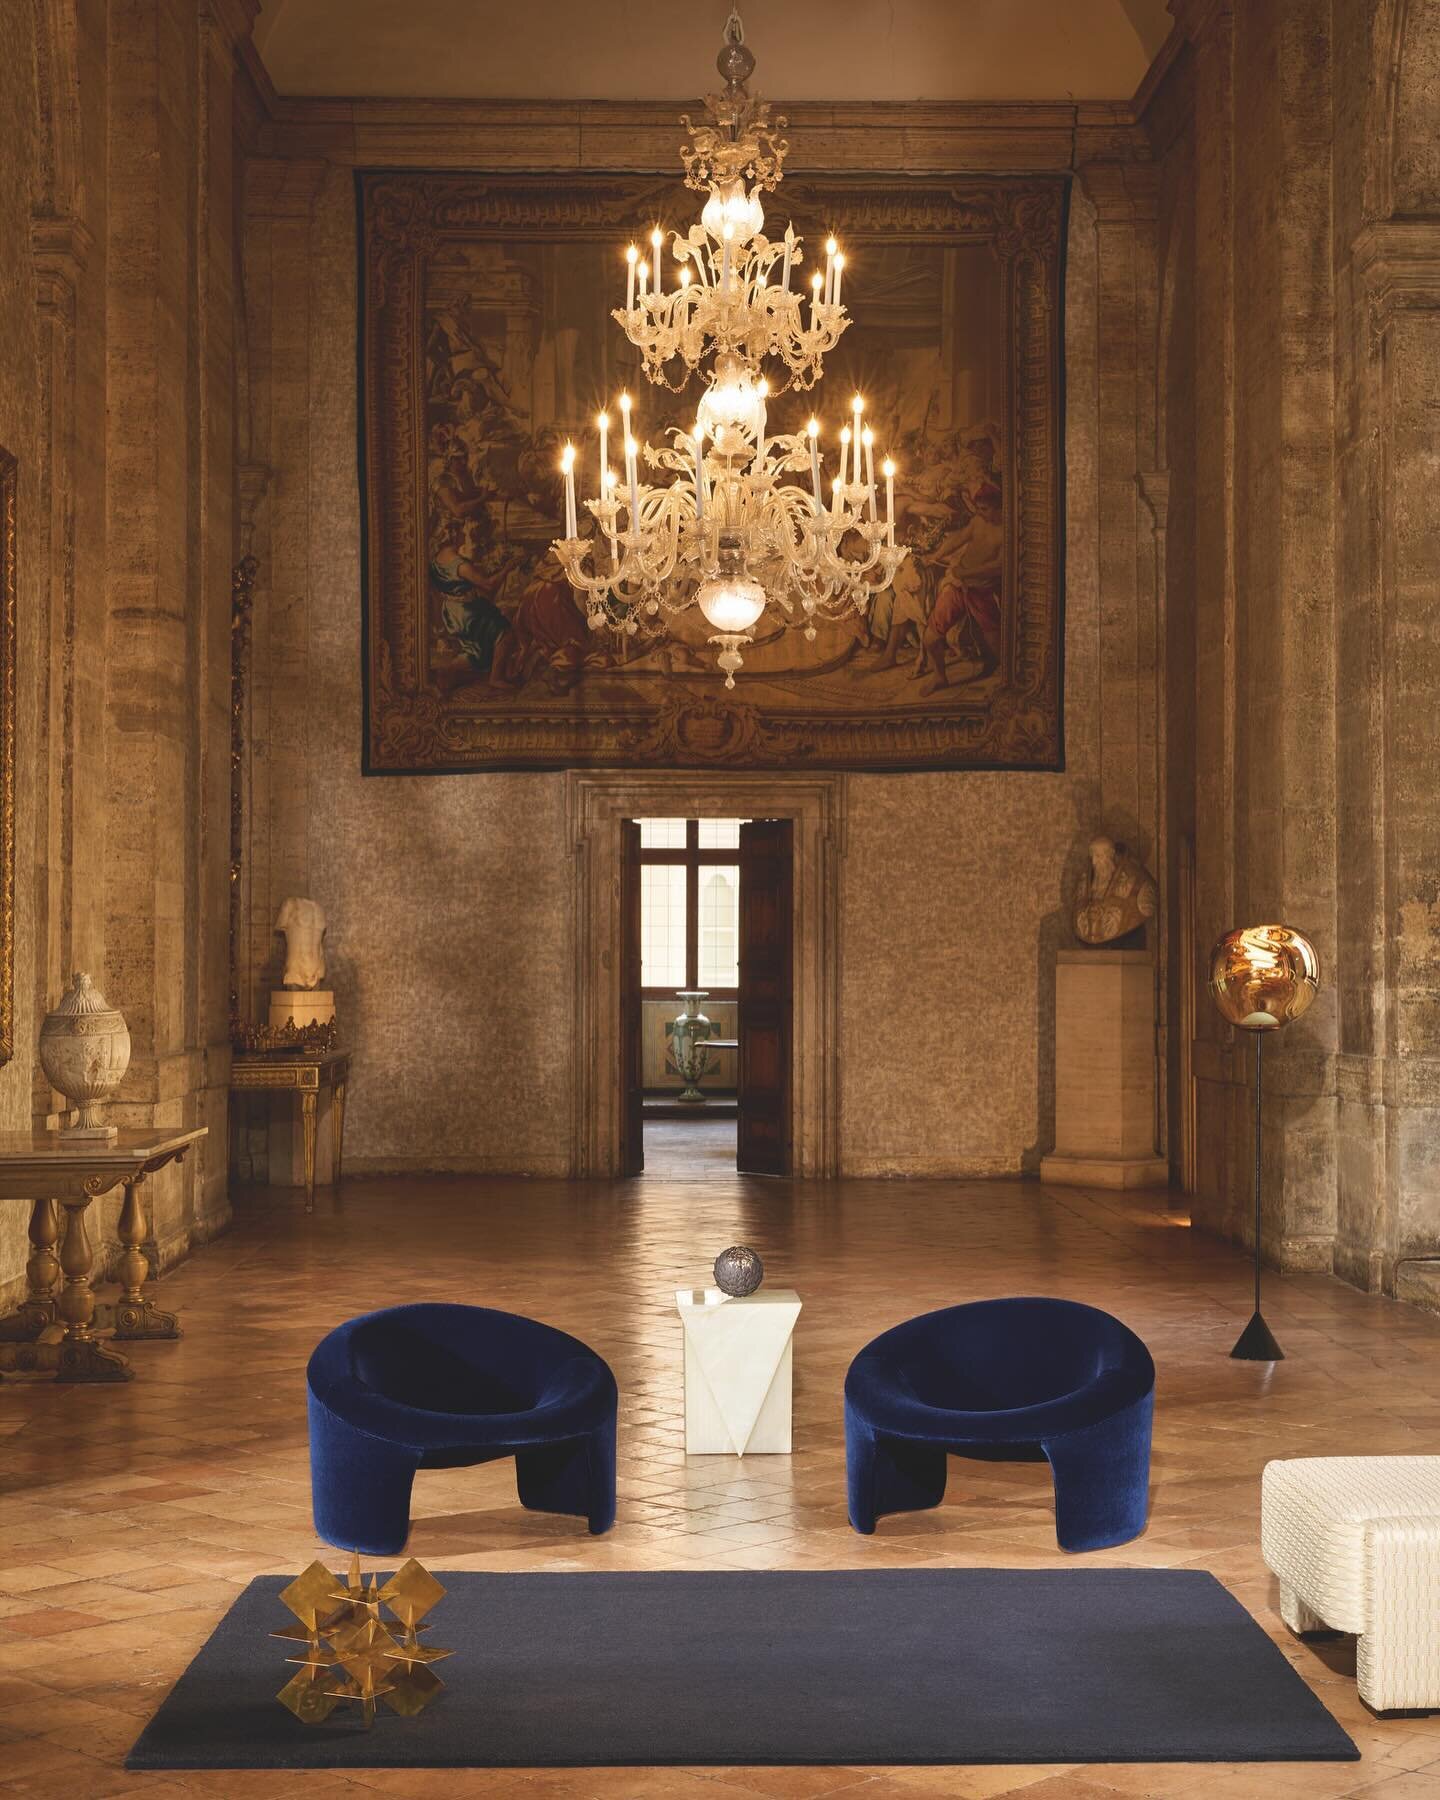 PARIS-ROME &amp; more collections out of Misia Paris 

With the aim of promoting French Arts abroad, particularly in Italy, the Paris-Rome collection builds a bridge between the City of Light and the Eternal City. Luxurious velvets, refined silks, un